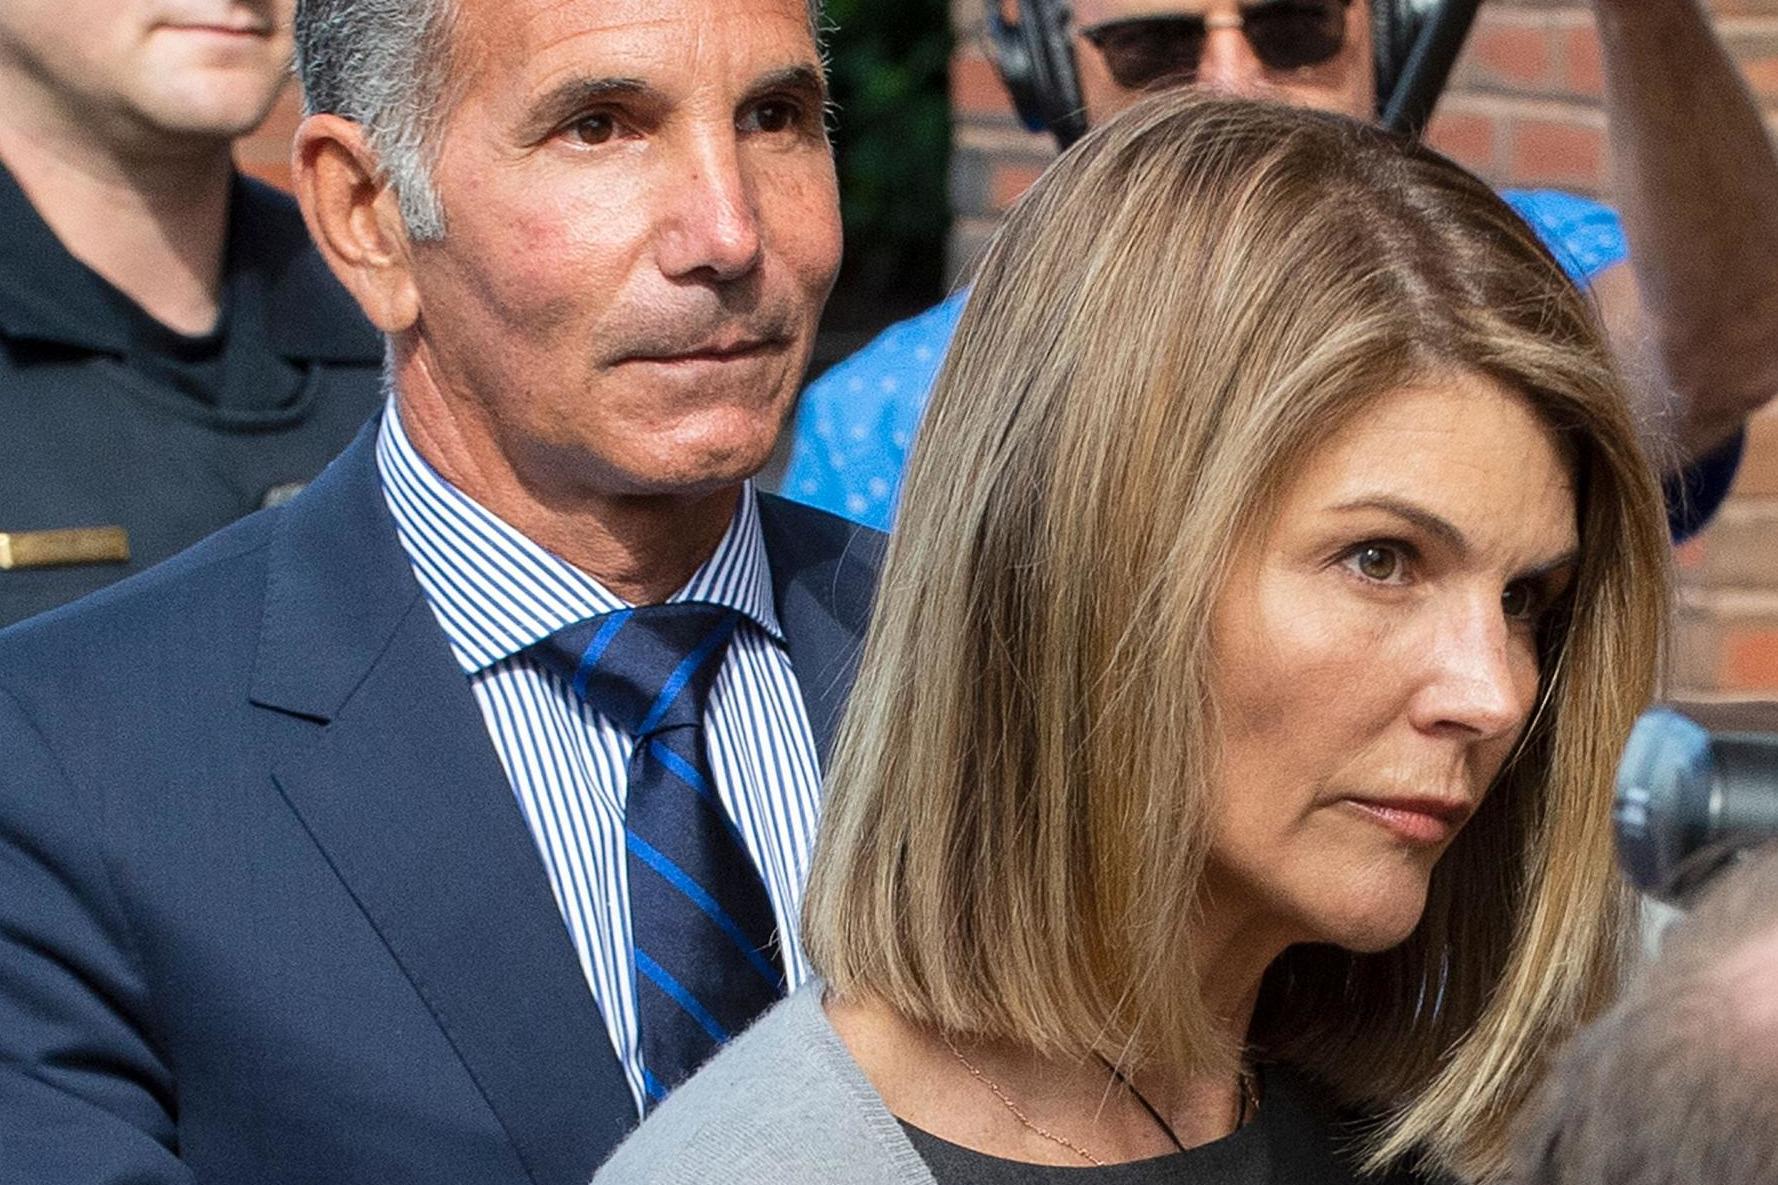 Lori Loughlin and husband Mossimo Giannulli face bribery charges in college admissions scandal